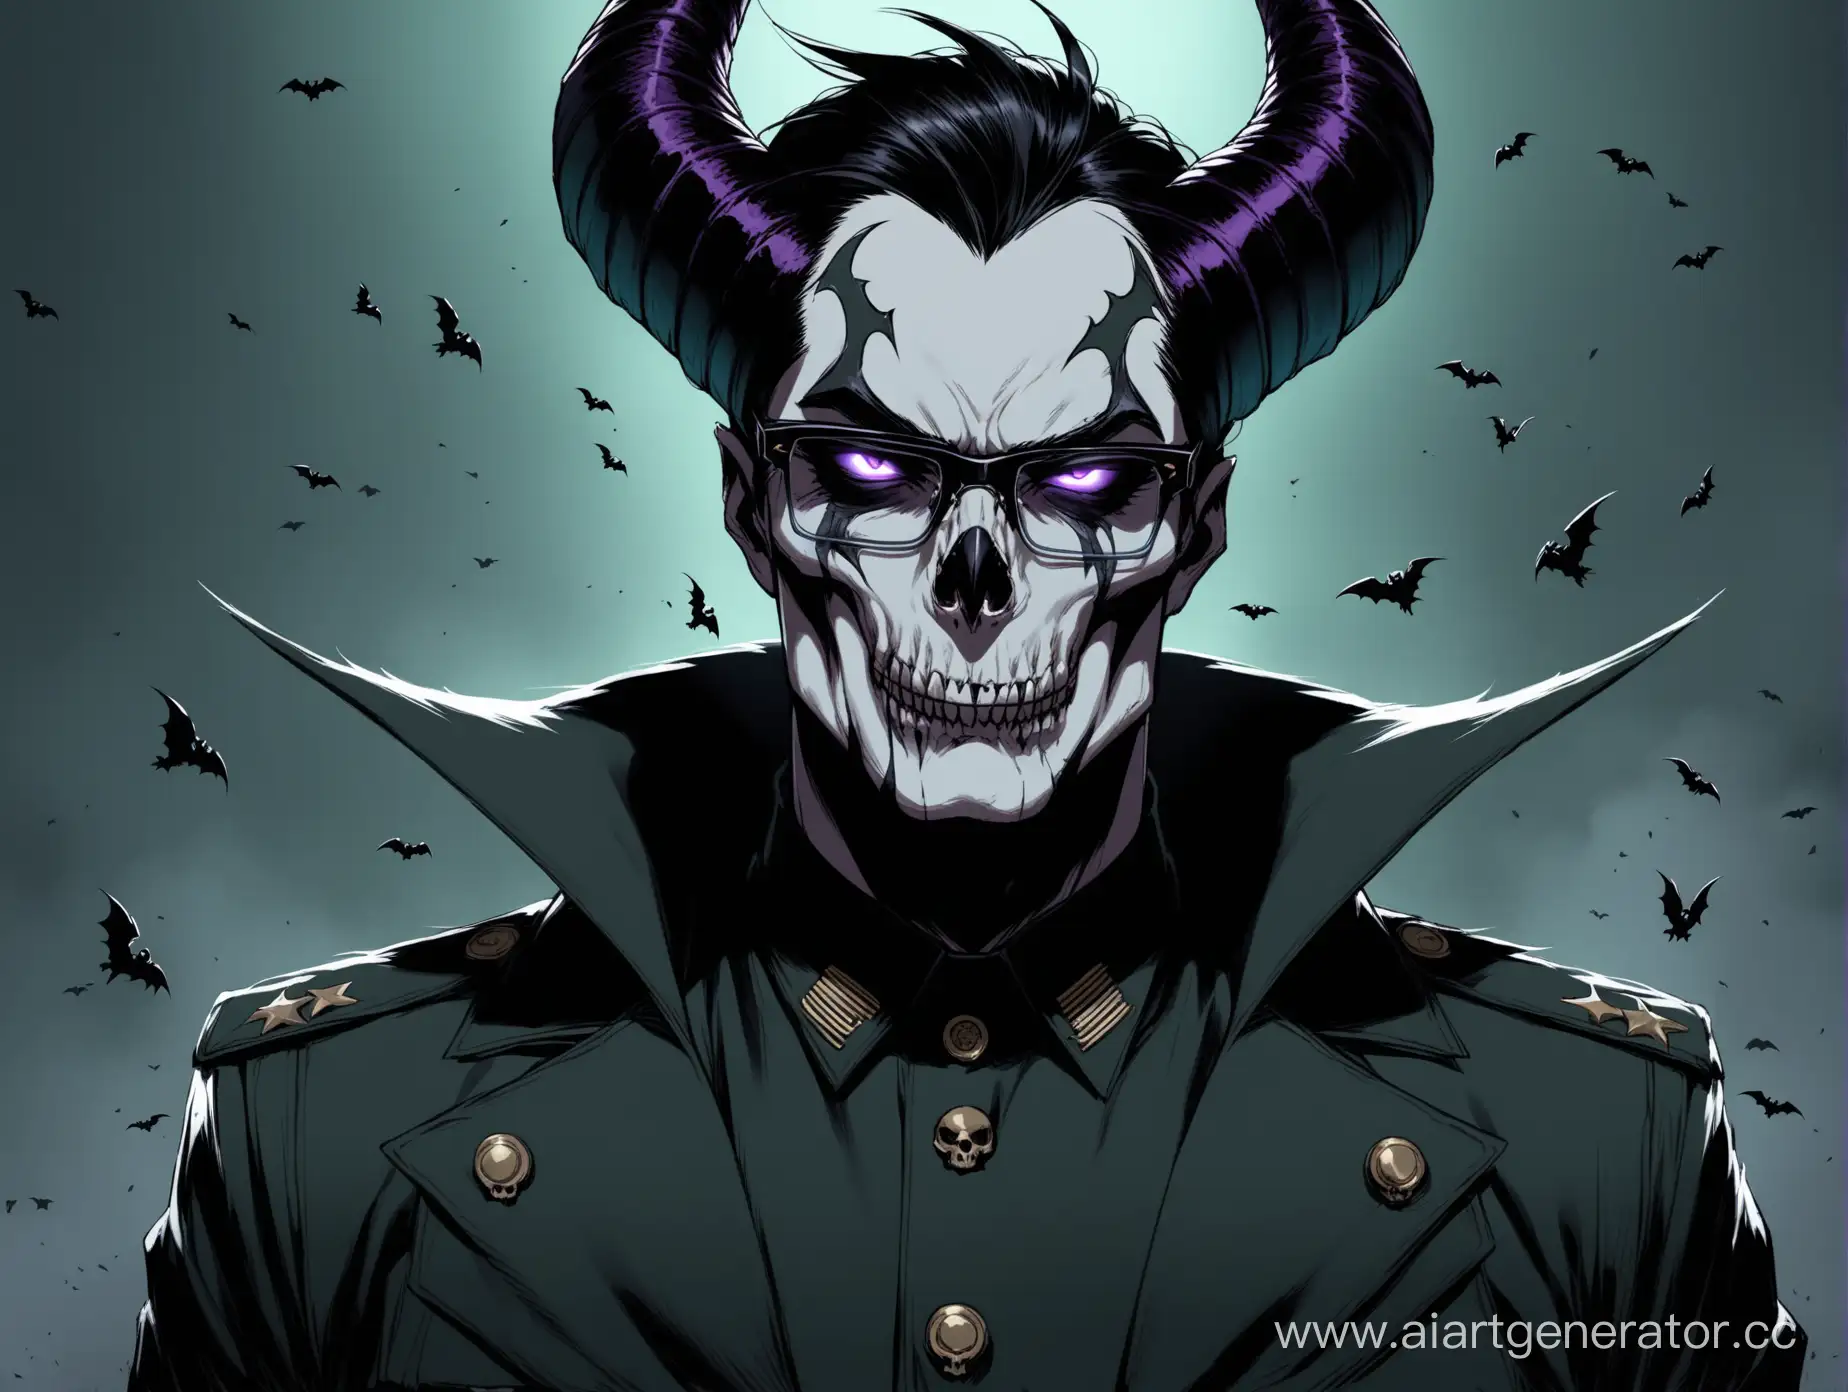 Sinister-Military-Officer-with-Maleficent-Horns-and-Skull-Makeup